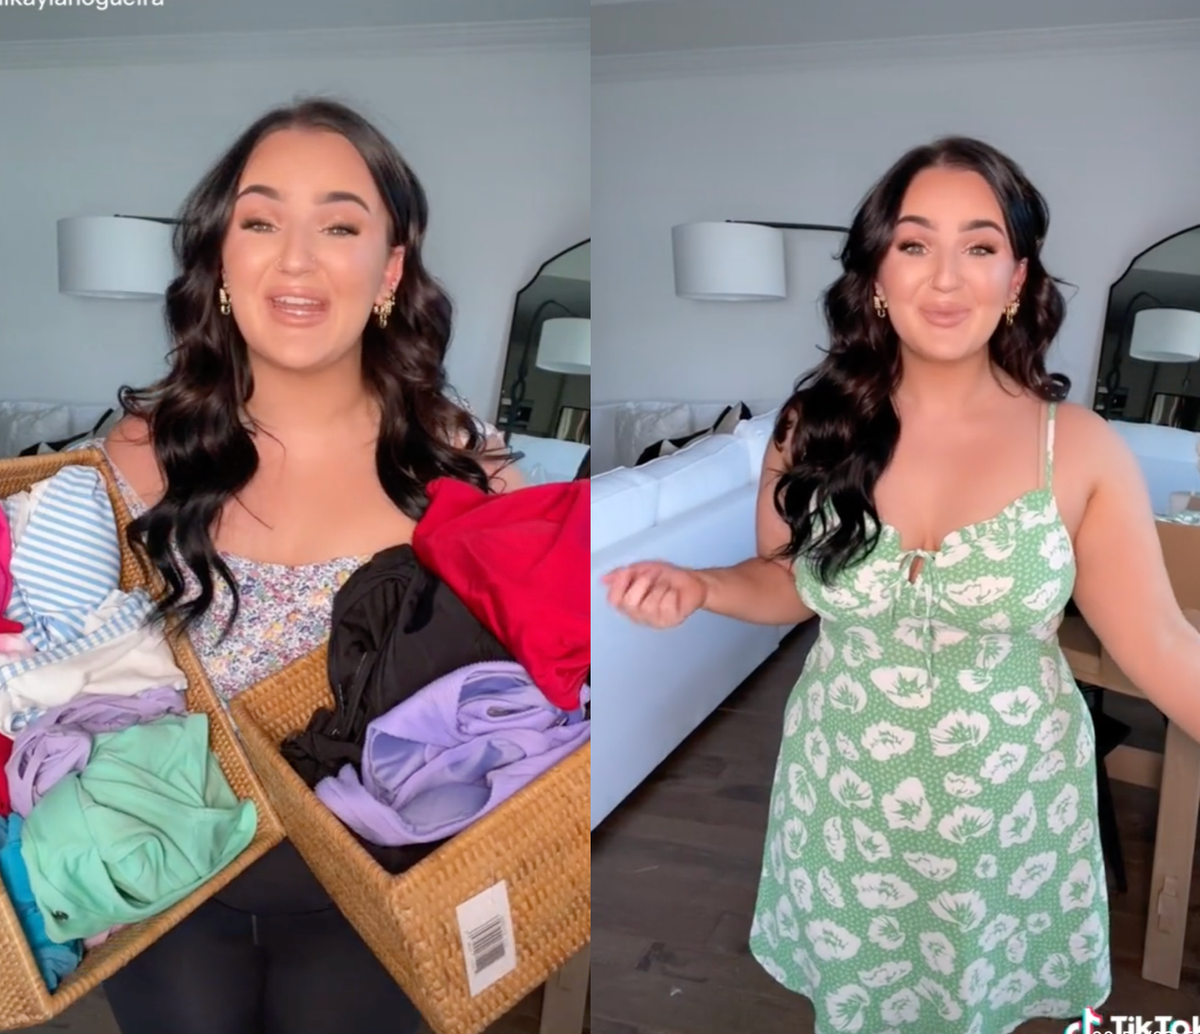 Influencer Mikayla Nogueira says she’s embracing her ‘new body’ after ...